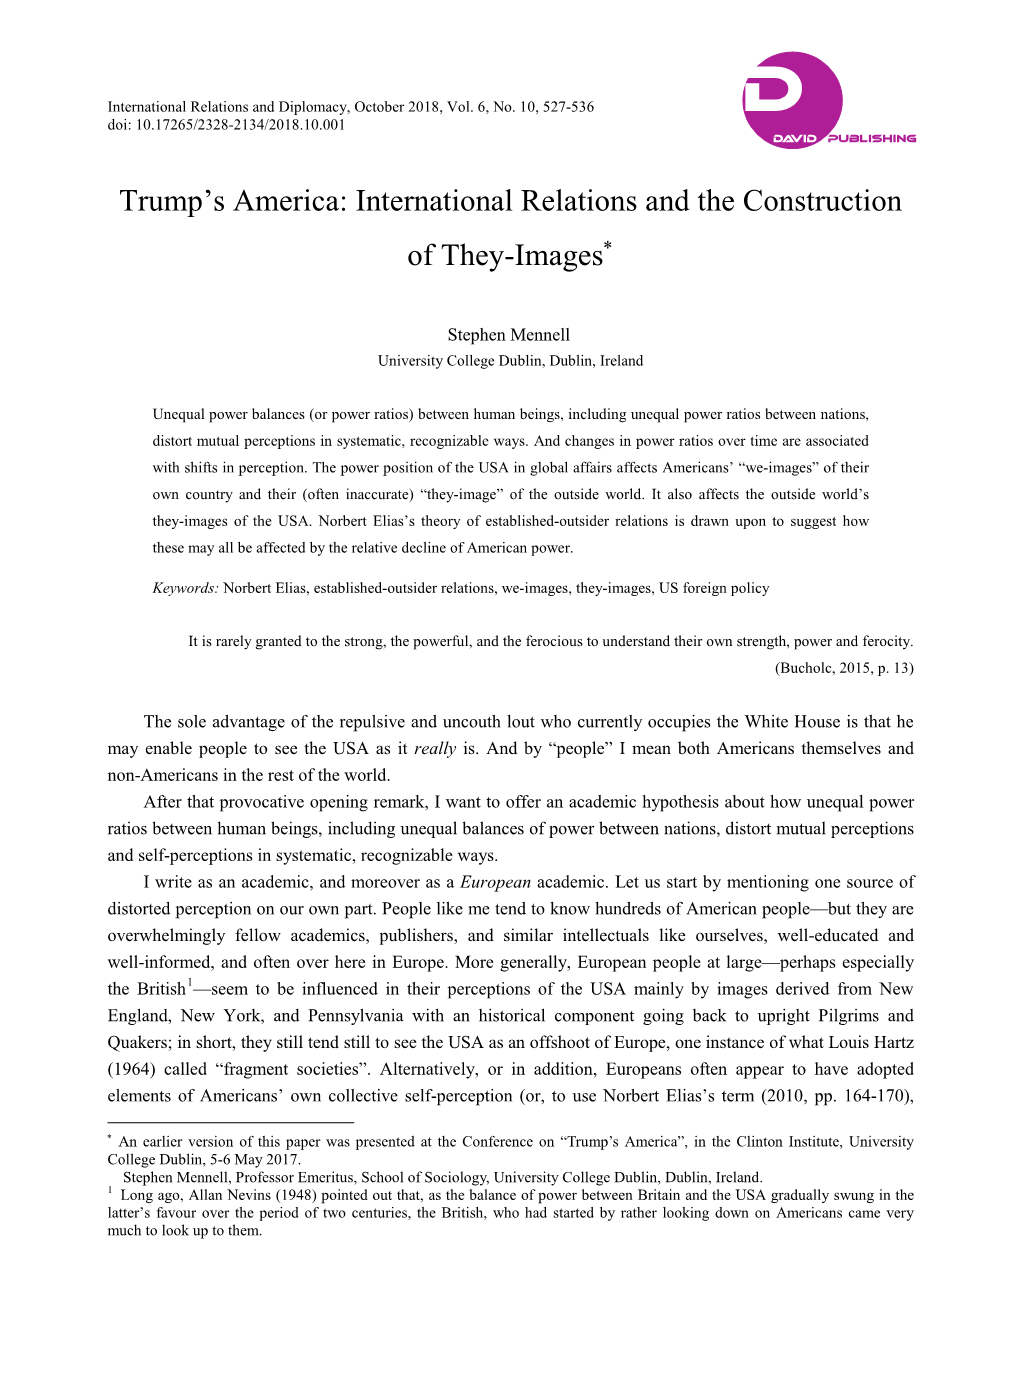 International Relations and the Construction of They-Images∗